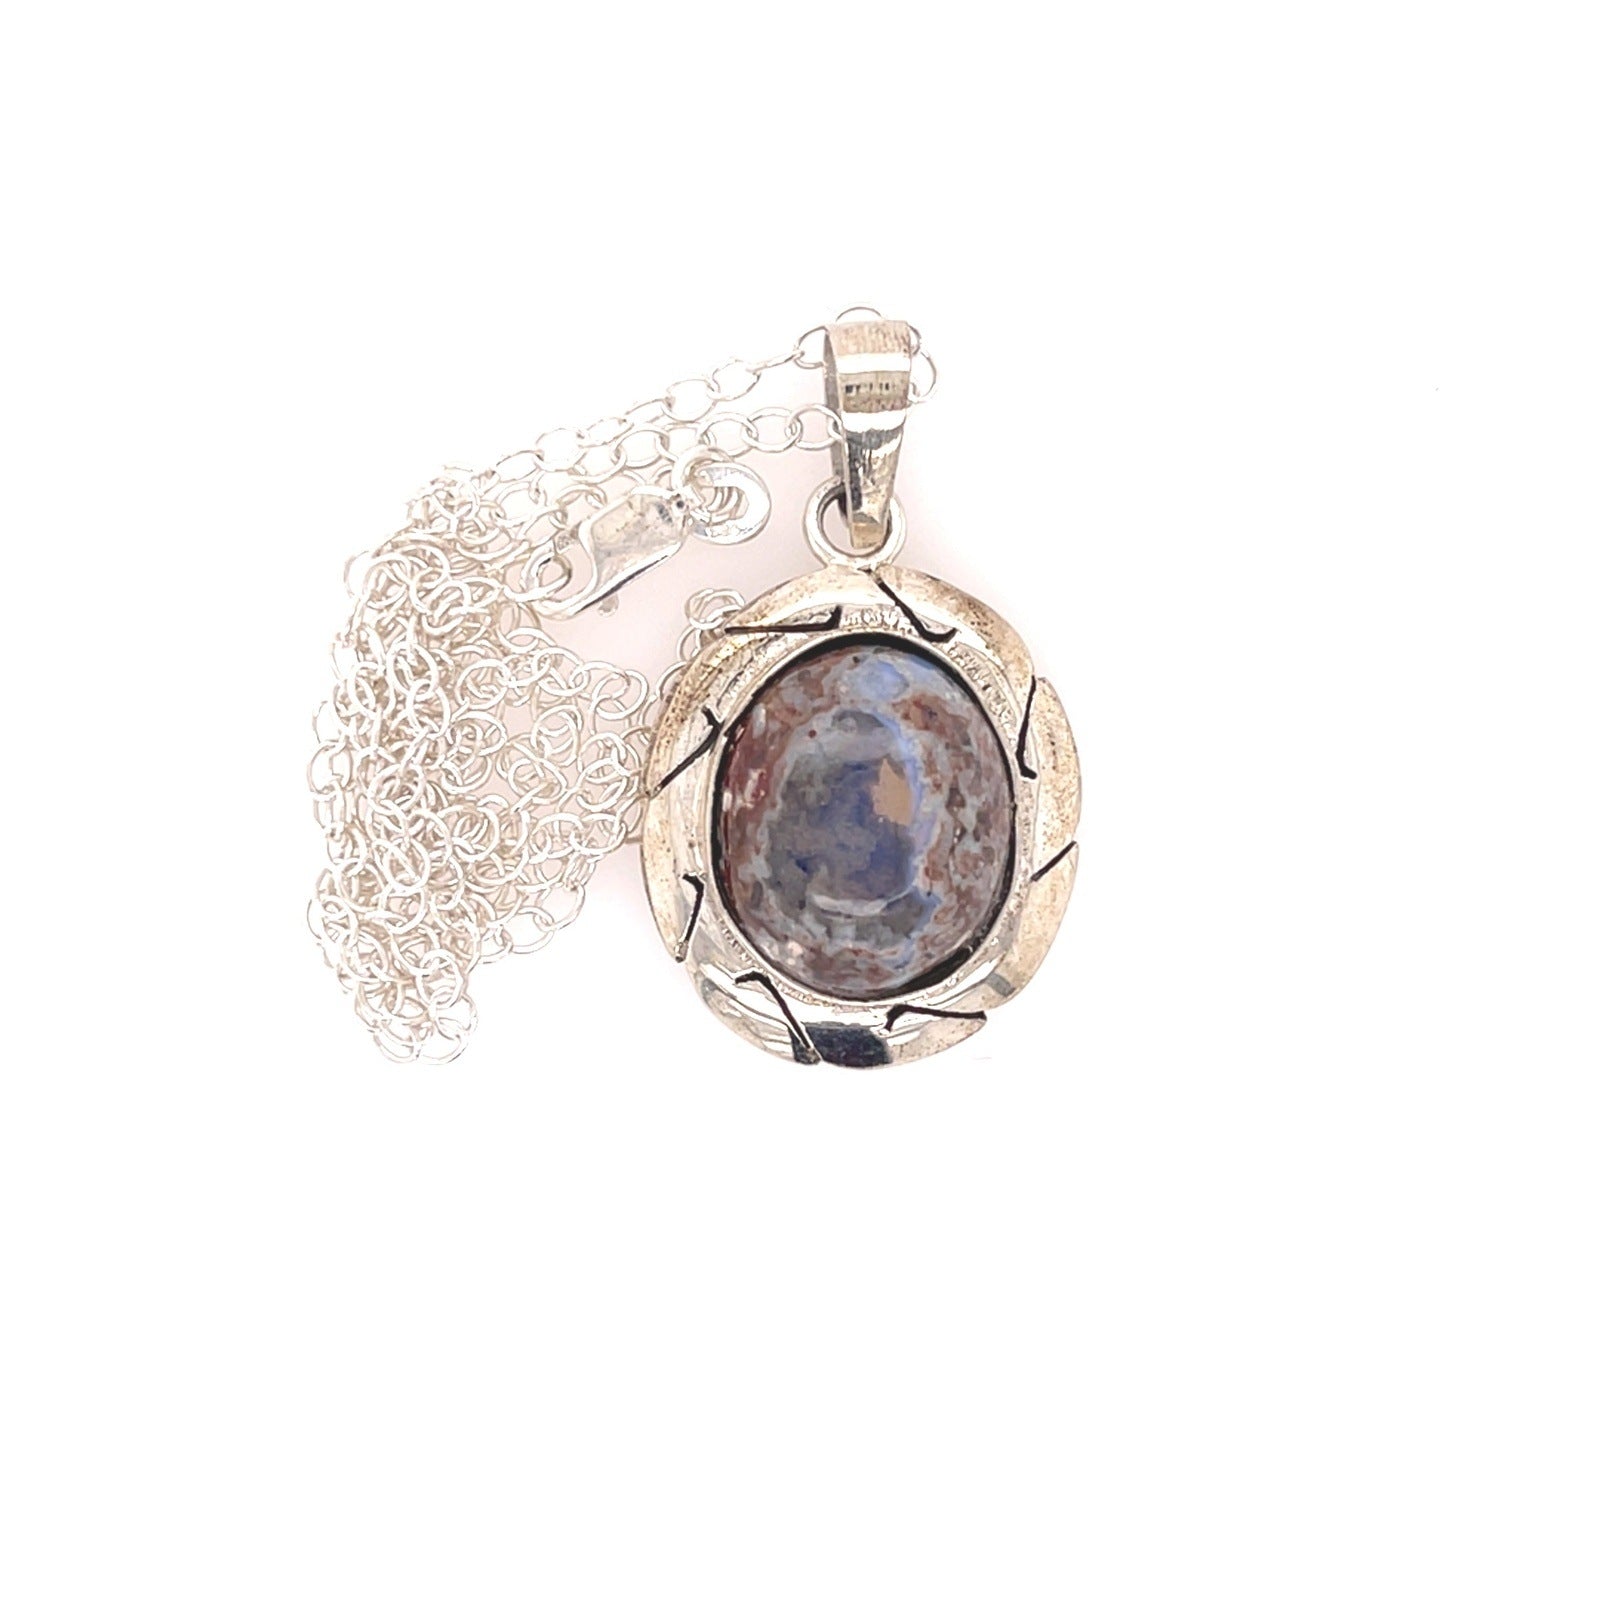 Fade to Blue Mexican Opal Necklace - Sheila Marie Opals